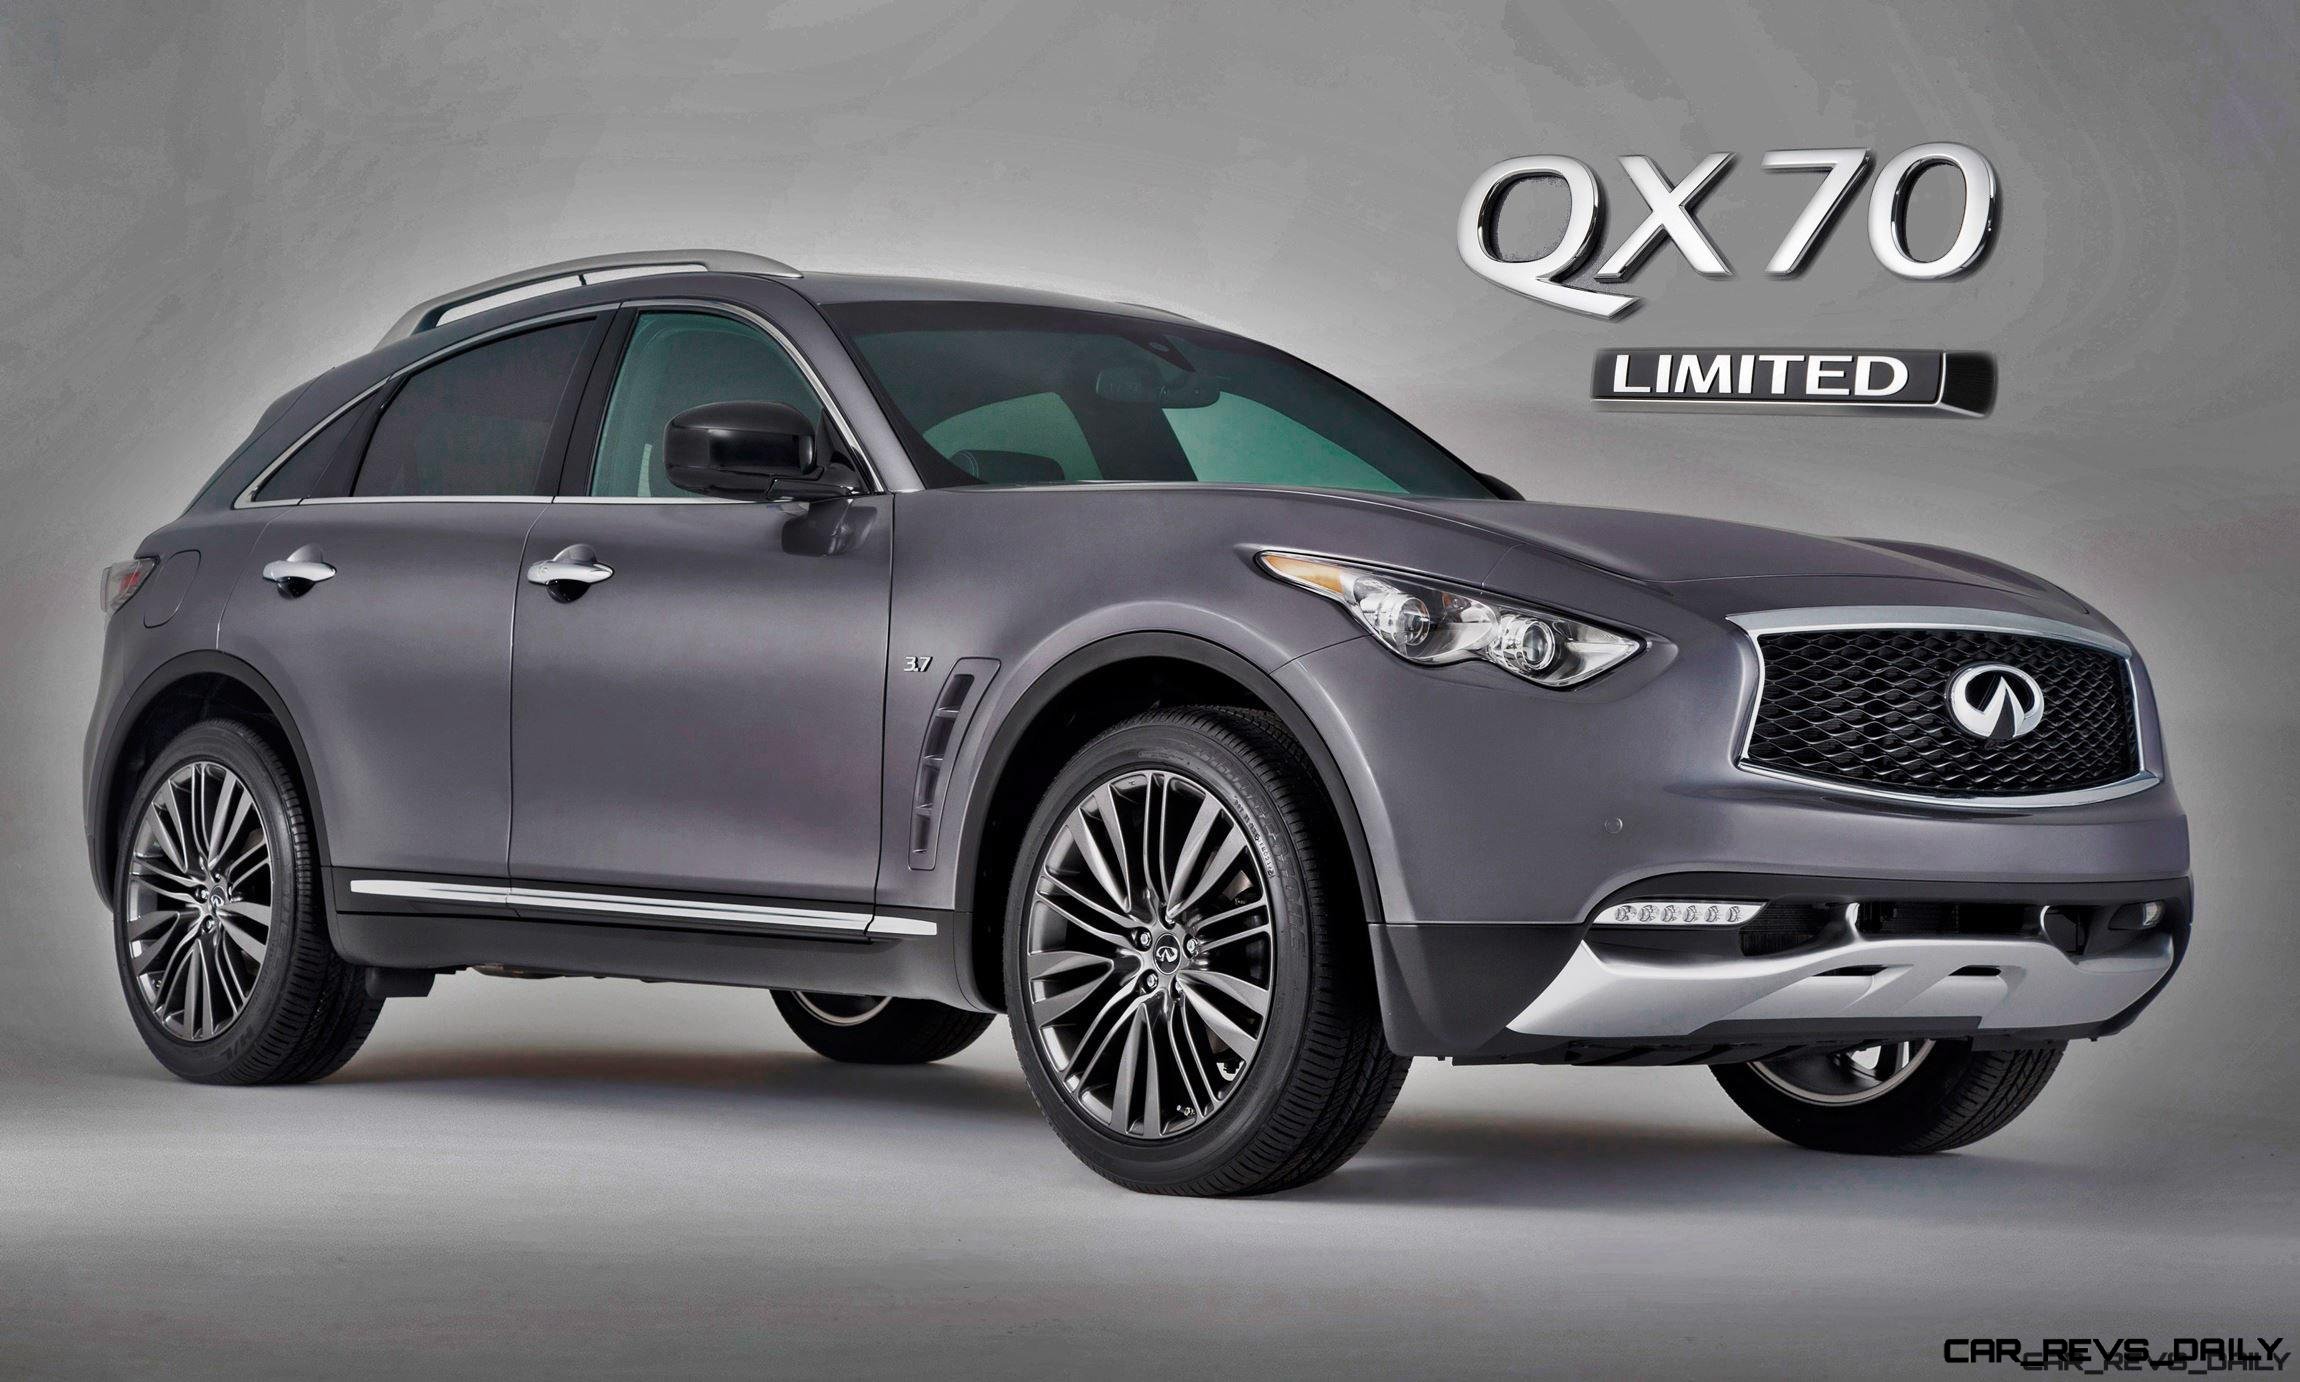 New York SoM! 2017 Infiniti QX70 Limited Special Pips Big Debuts with Early  Reveal » CAR SHOPPING » Car-Revs-Daily.com